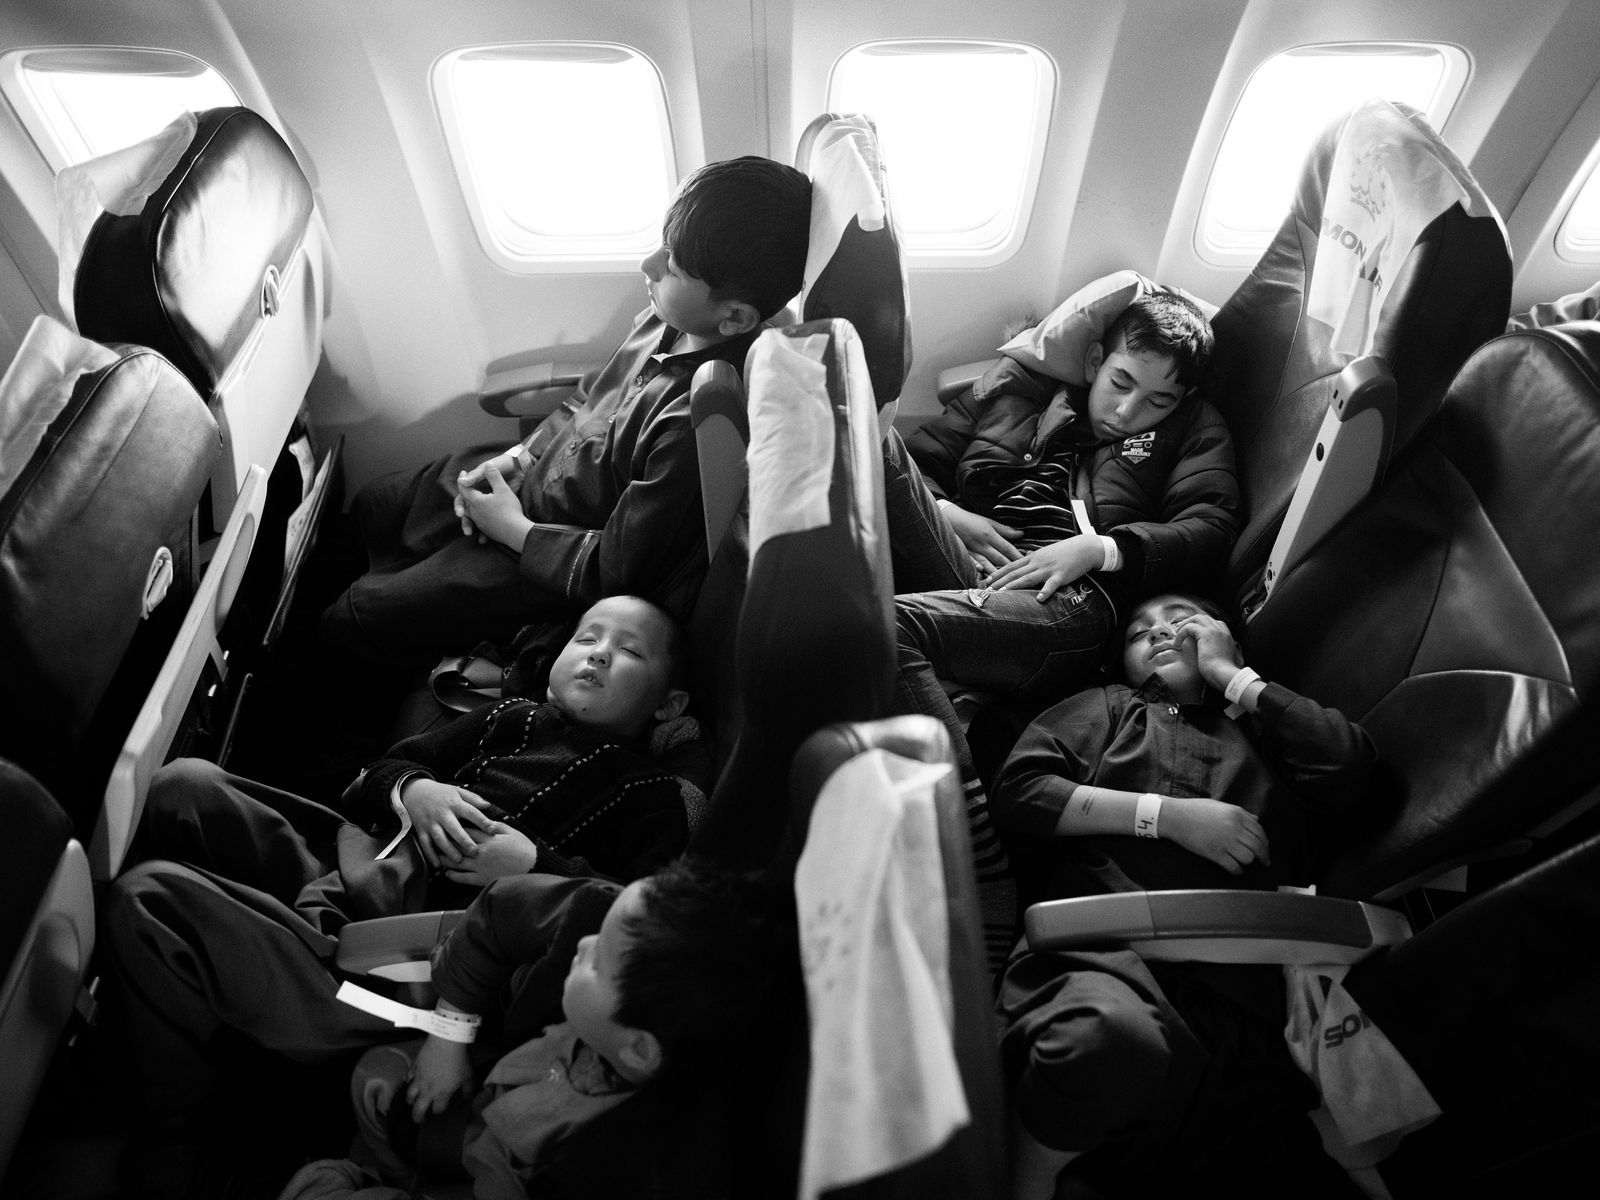 © Toby Binder - Children are falling asleep in the plane on their way to Germany.